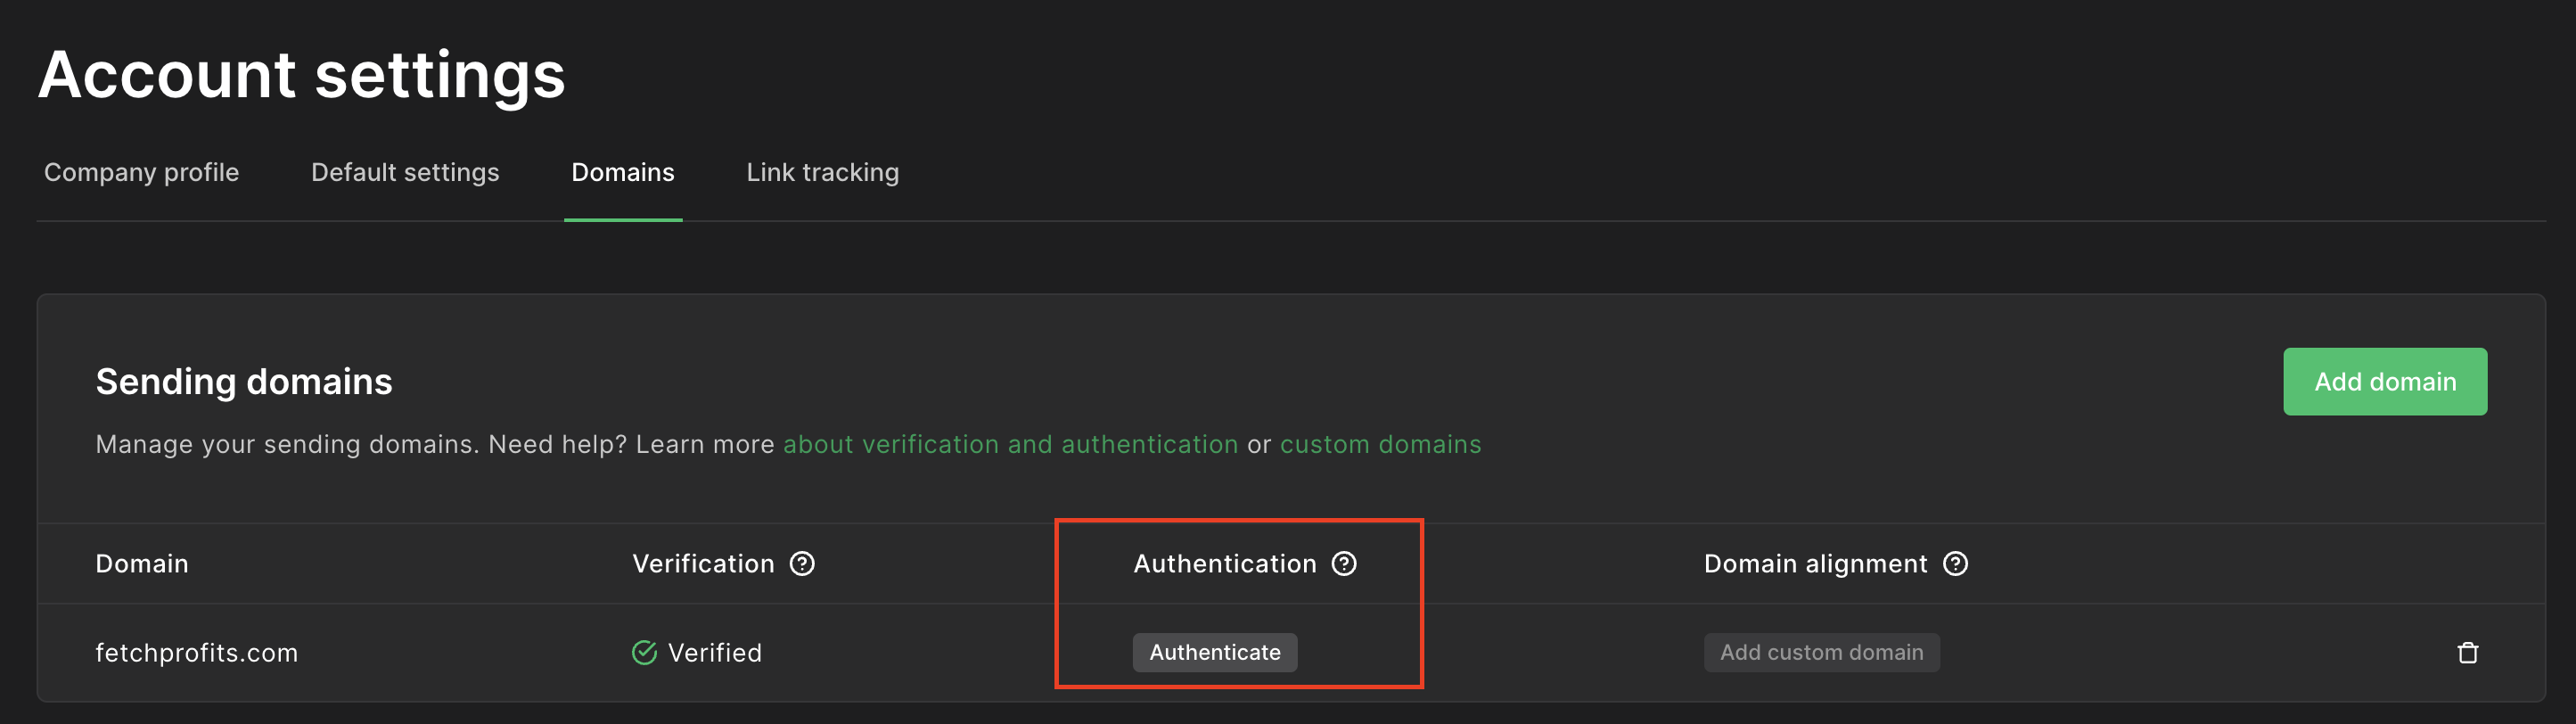 authenticate domain with mailerlite